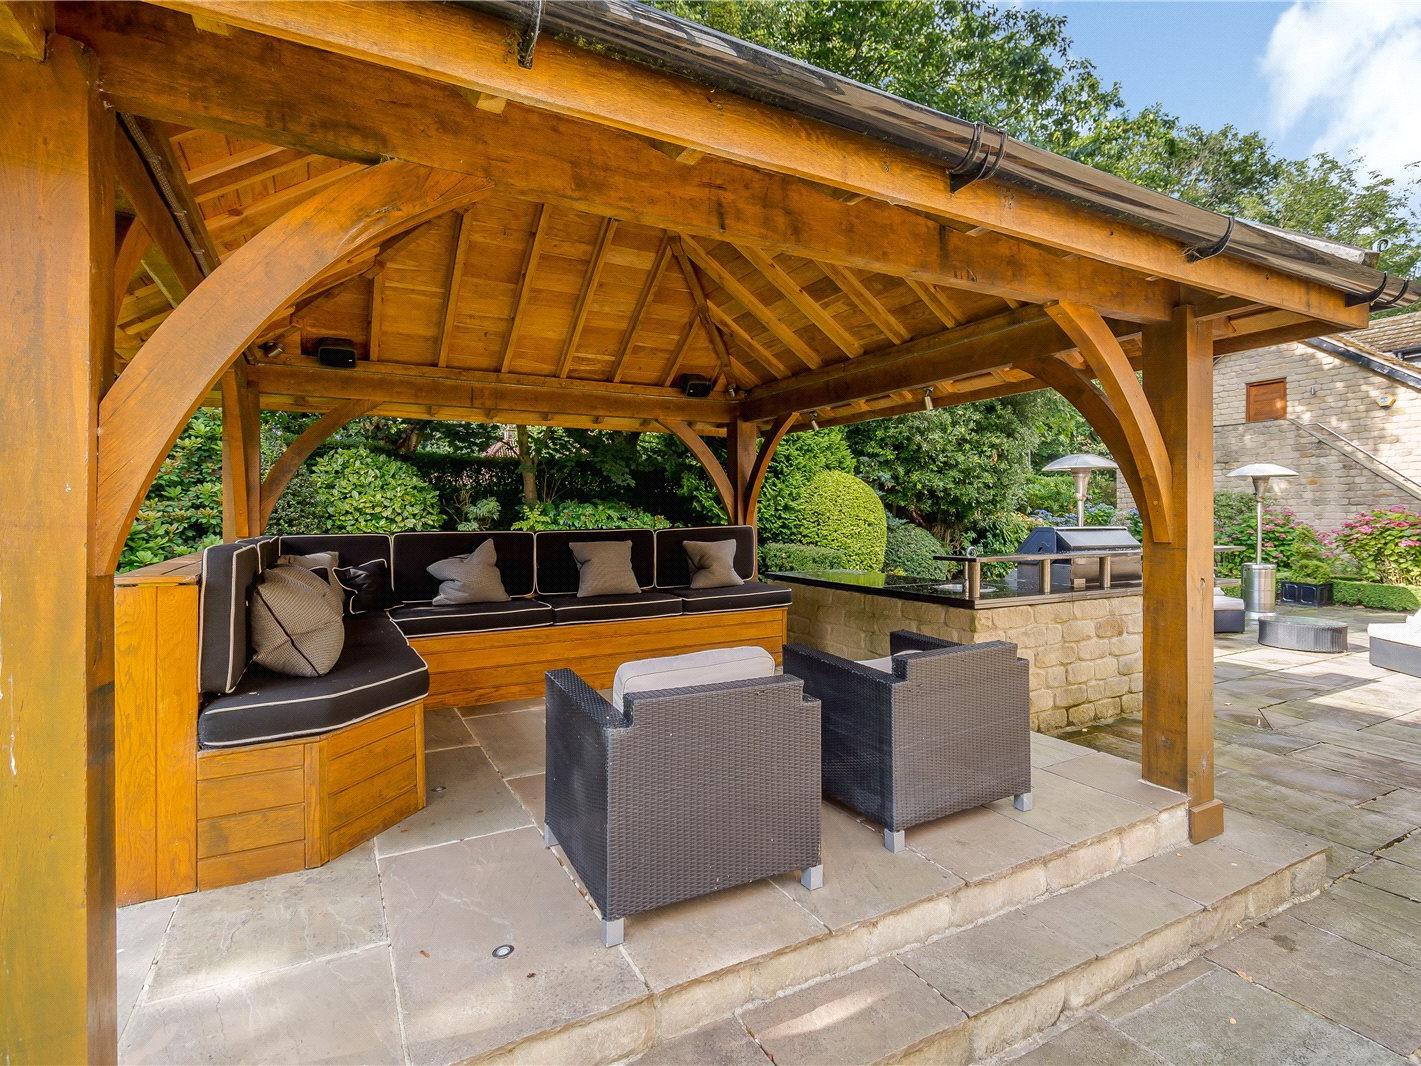 A sheltered seating area in the garden is perfect for BBQs and summer parties.